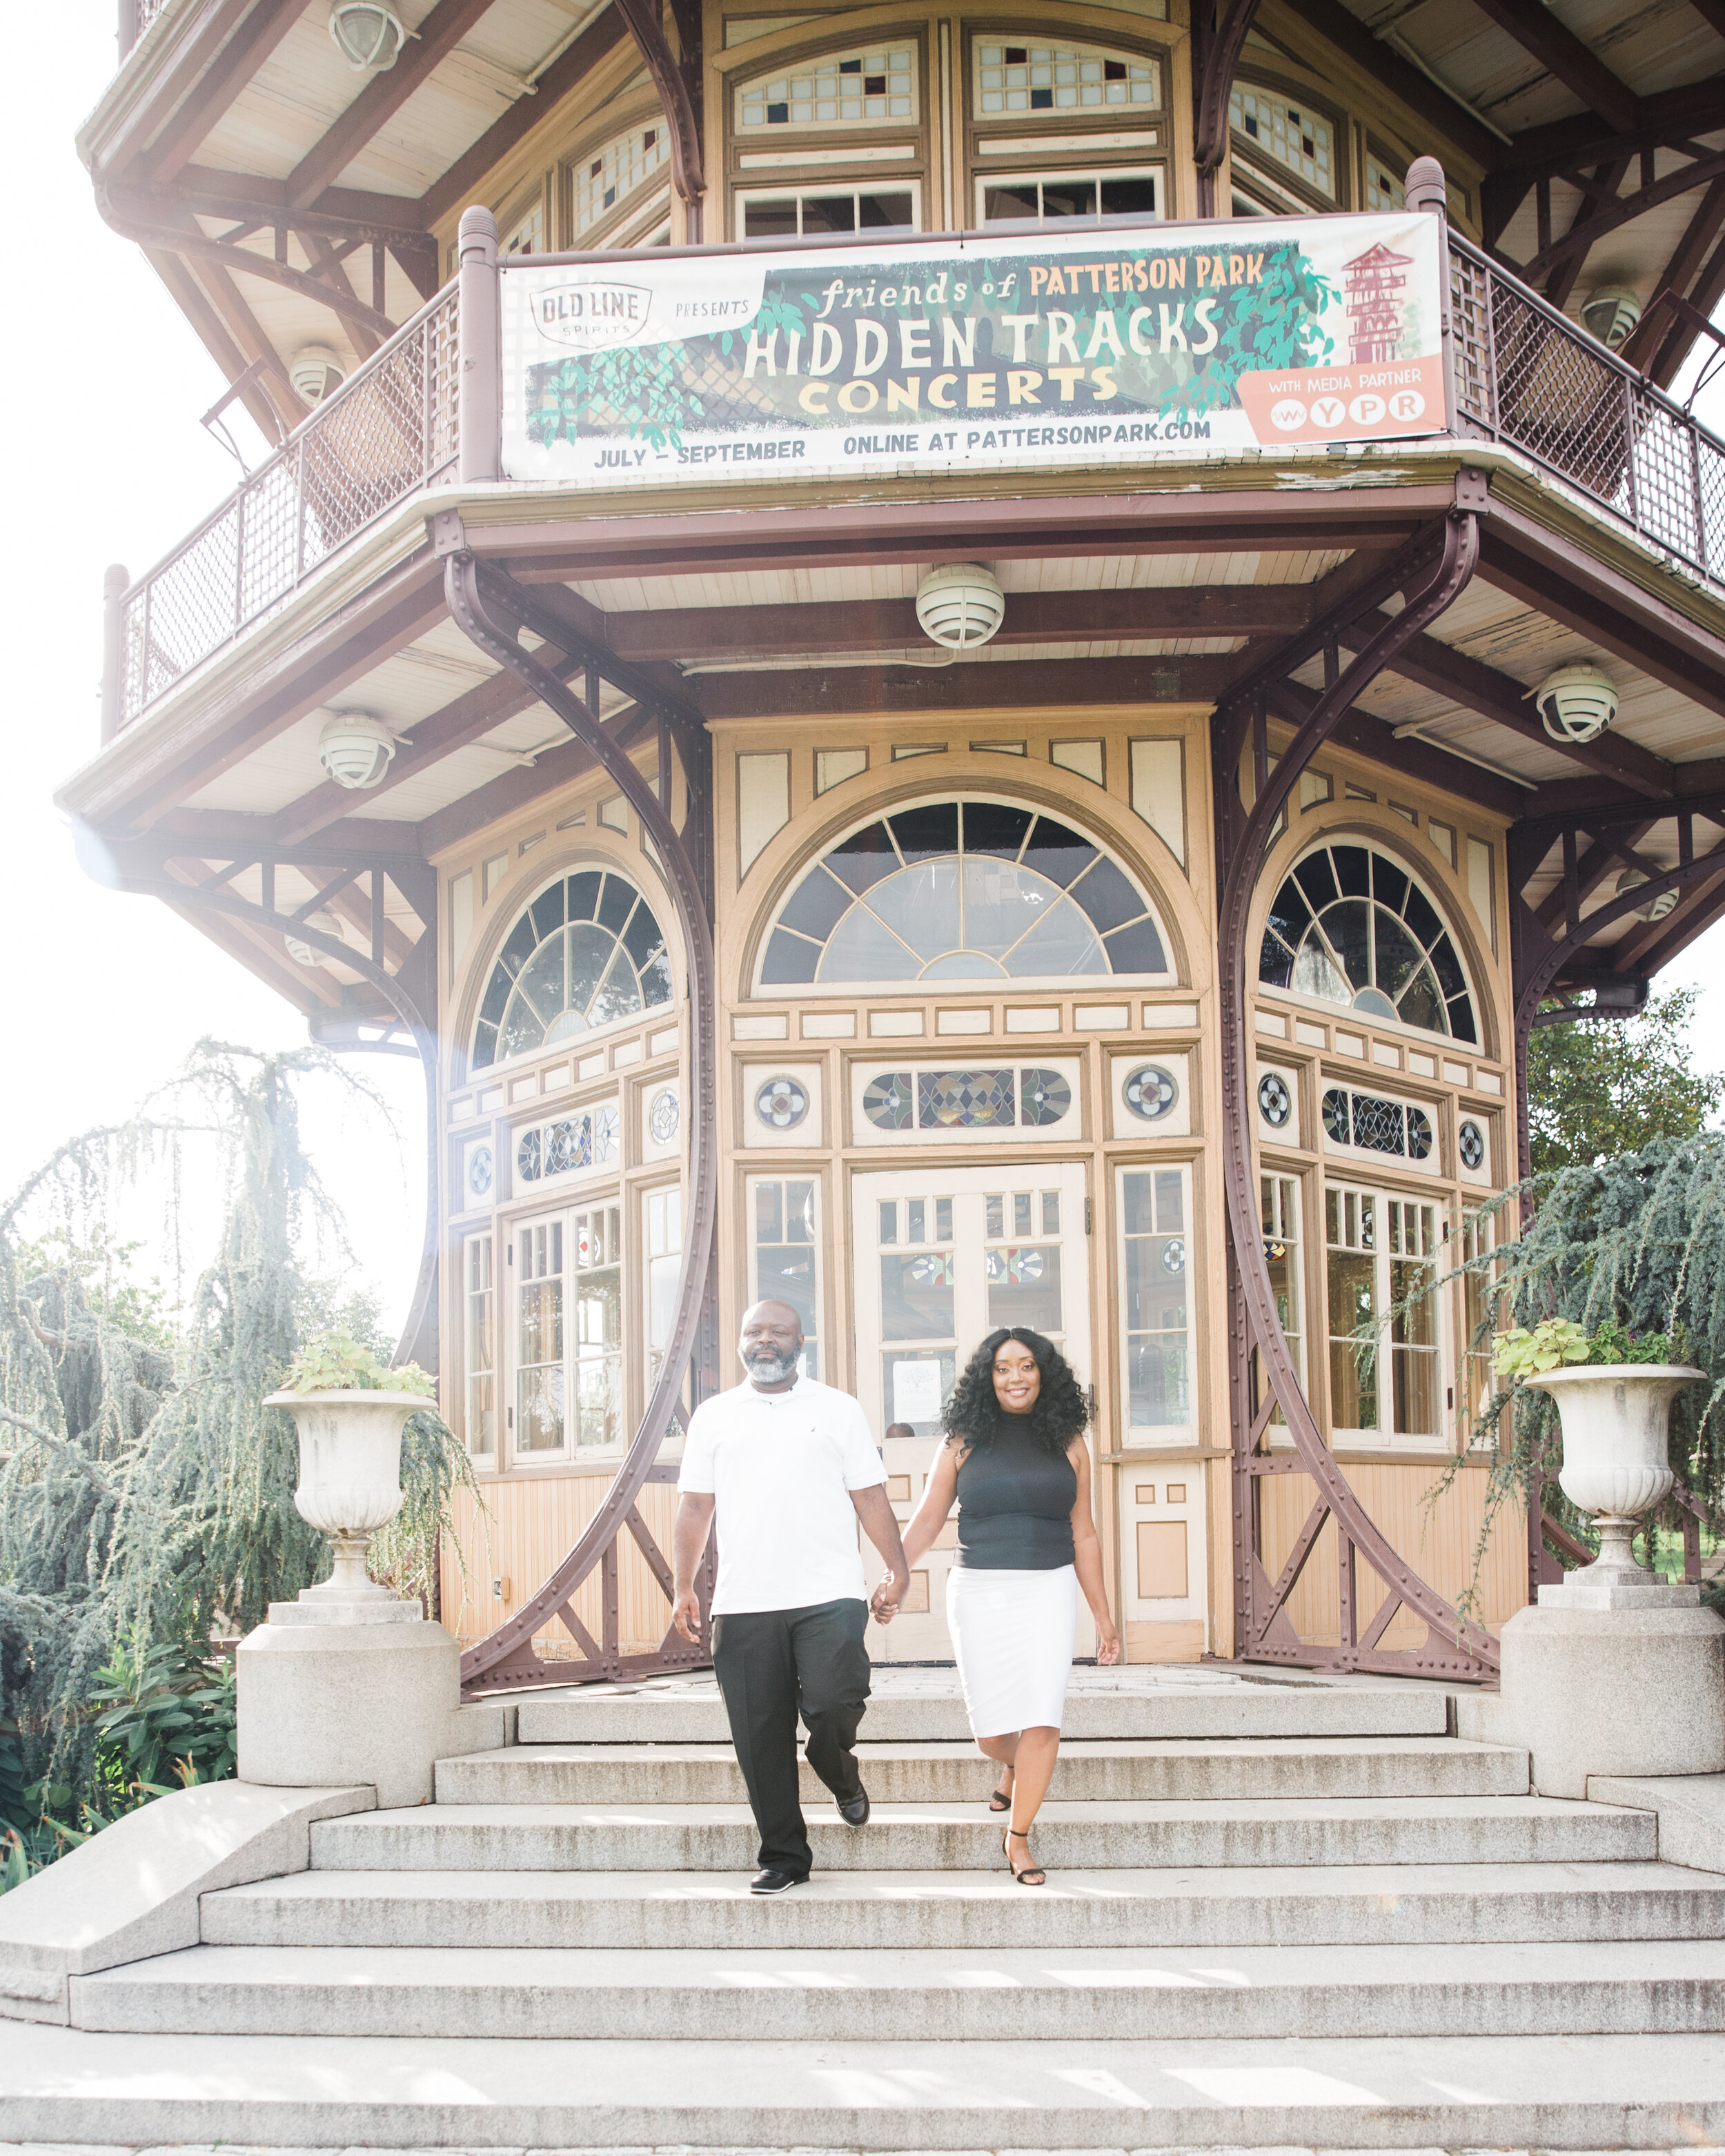 Patterson Park Engagement Session with Black Photographers Megapixels media in Baltimore Maryland (8 of 32).jpg